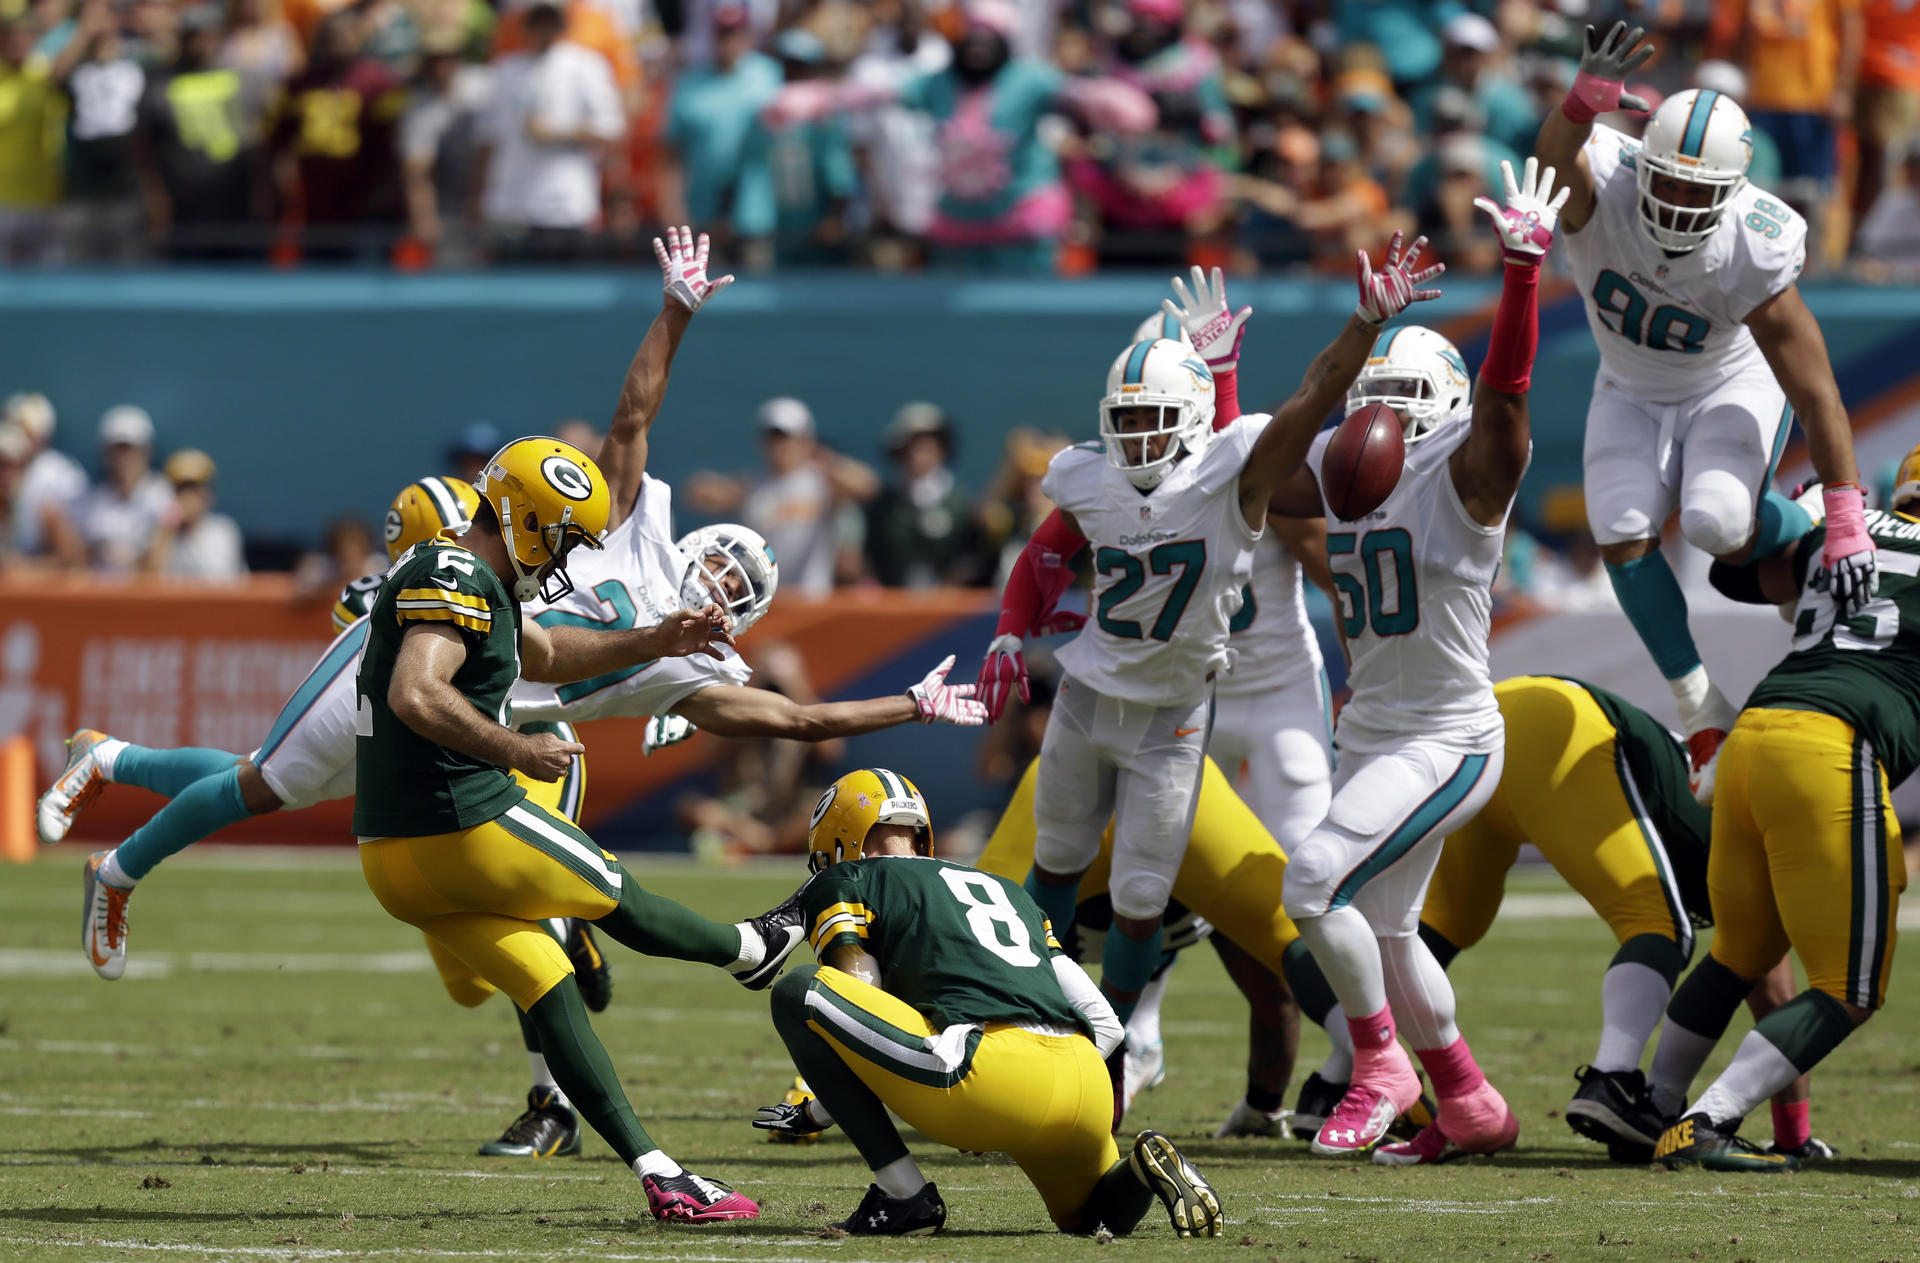 Green Bay kicker Mason Crosby boots a field goal in the NFL game against Miami Dolphins, which the Packers won 27-24. Photo: AP